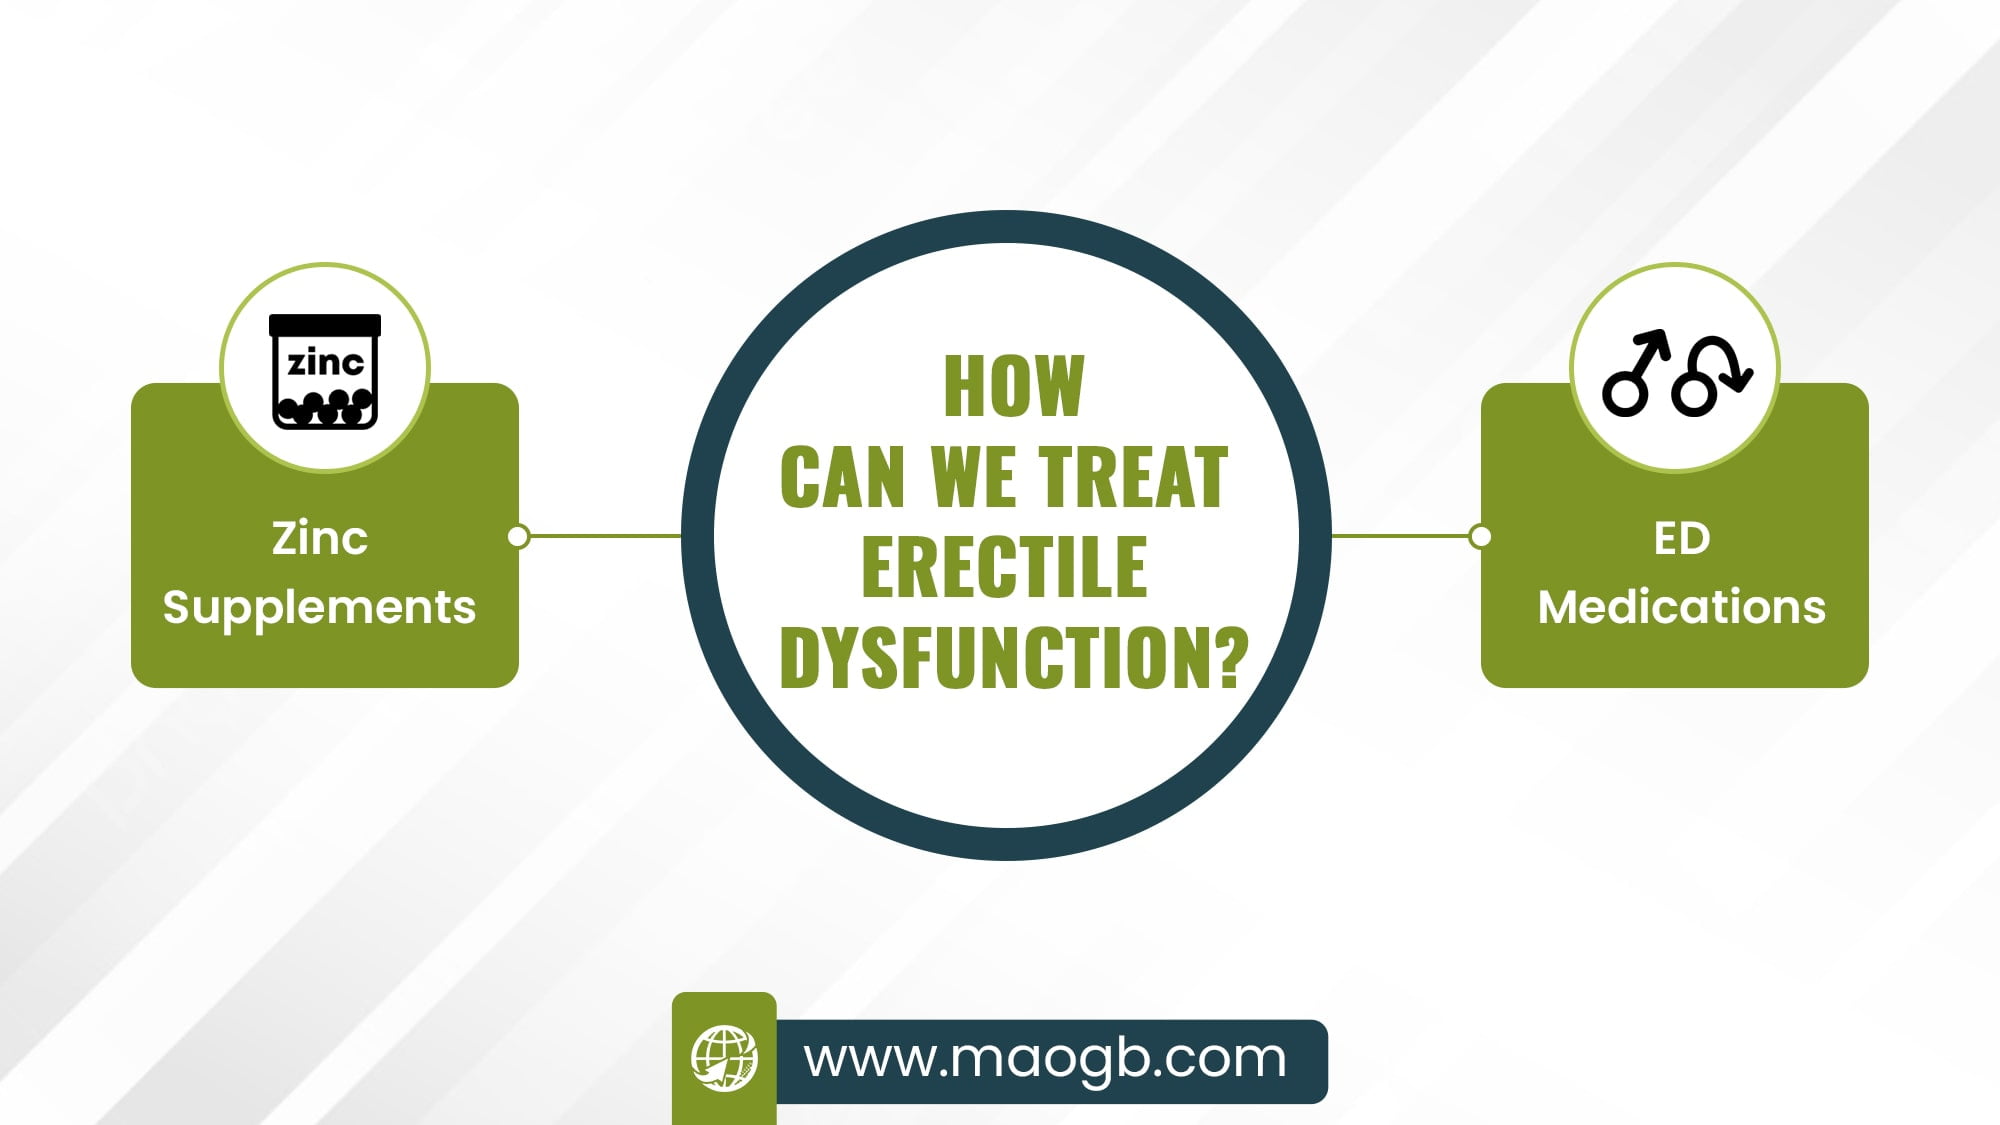 How Can We Treat Erectile Dysfunction